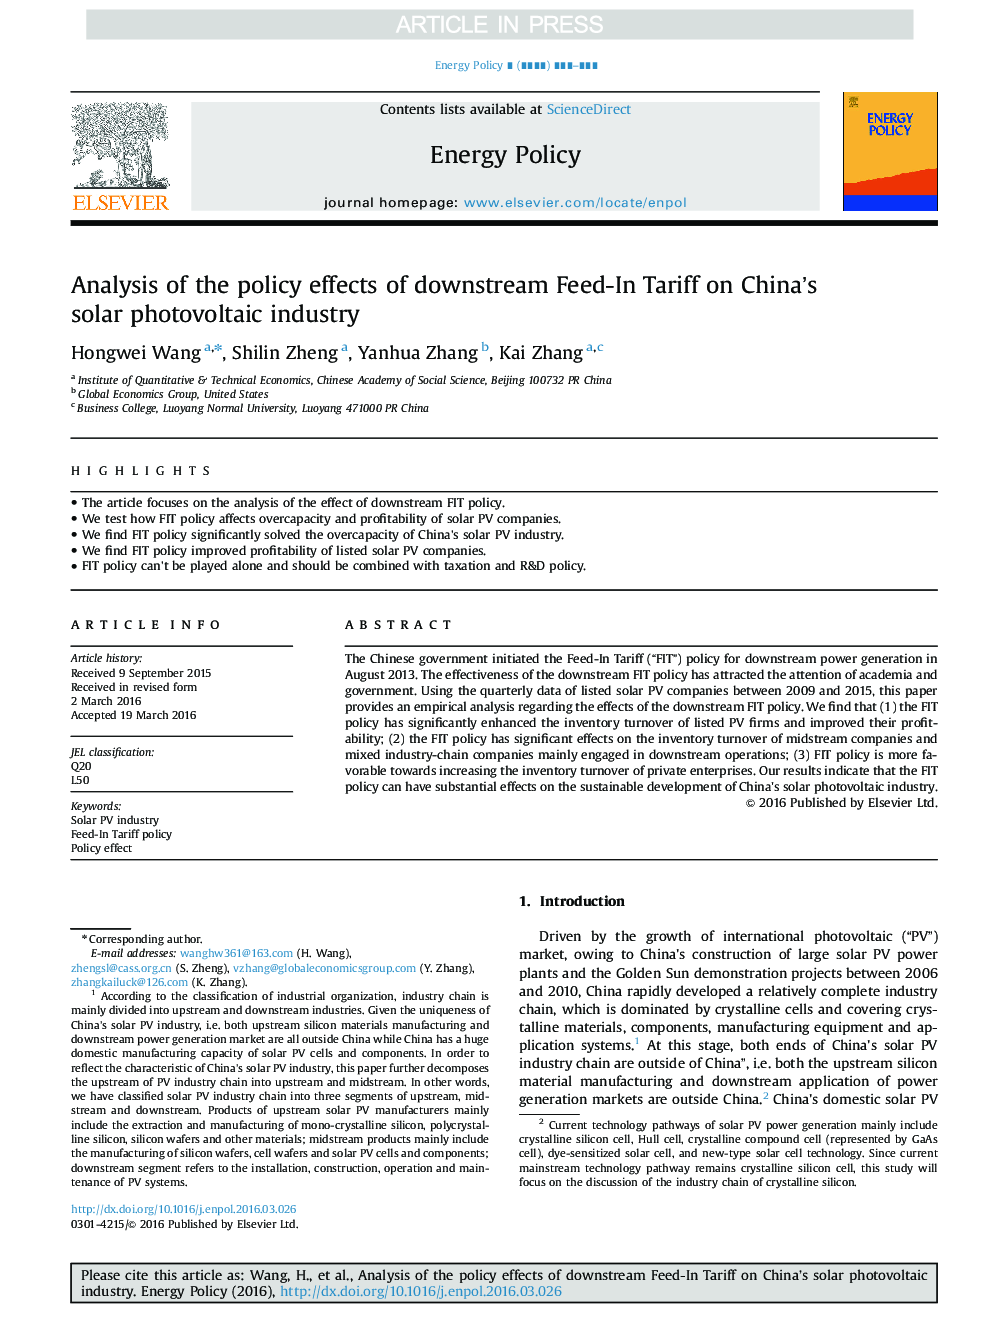 Analysis of the policy effects of downstream Feed-In Tariff on China's solar photovoltaic industry